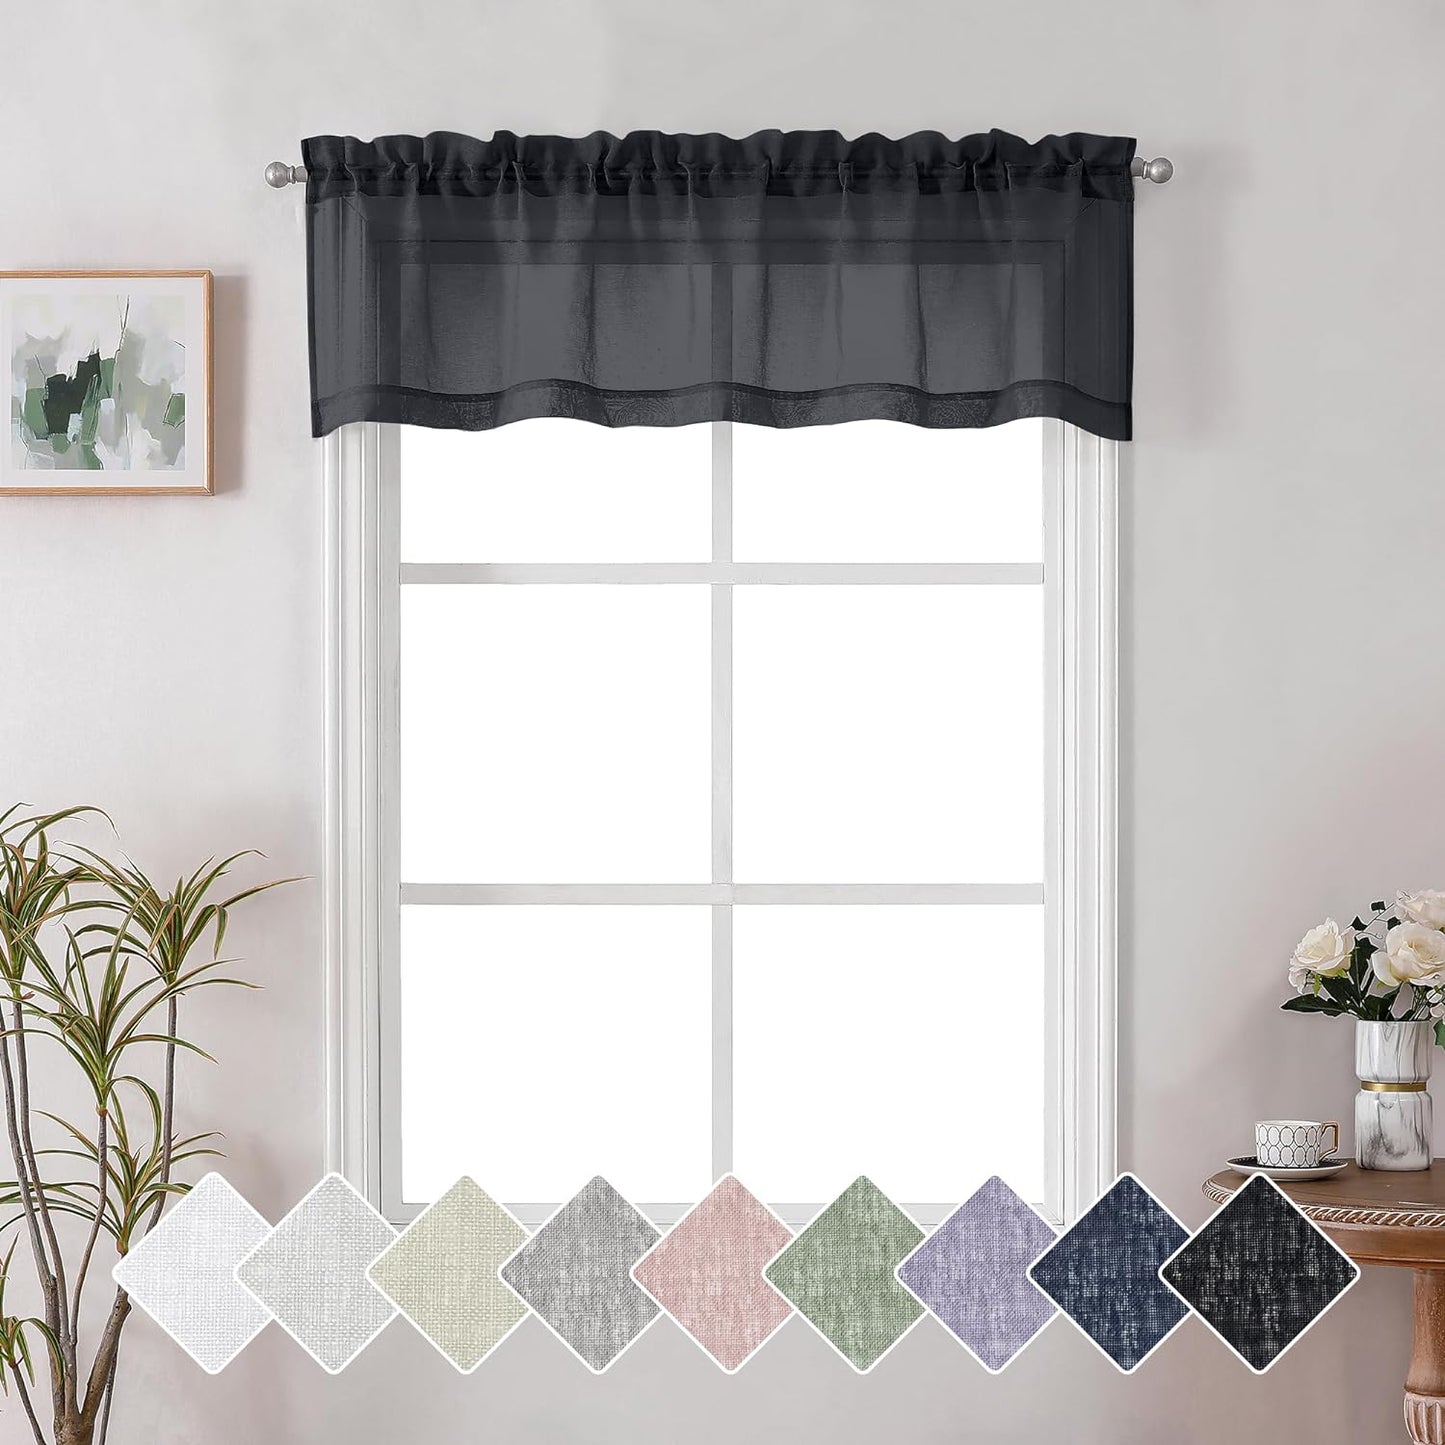 Lecloud Doris Faux Linen Sheer Grey Valance Curtains 14 Inches Length, Cafe Kitchen Bedroom Living Room Gauzy Silver Grey Curtain for Small Window, Slub Light Gray Valance Dual Rod Pockets 60X14 Inch  Lecloud Black 60 W X 14 L 